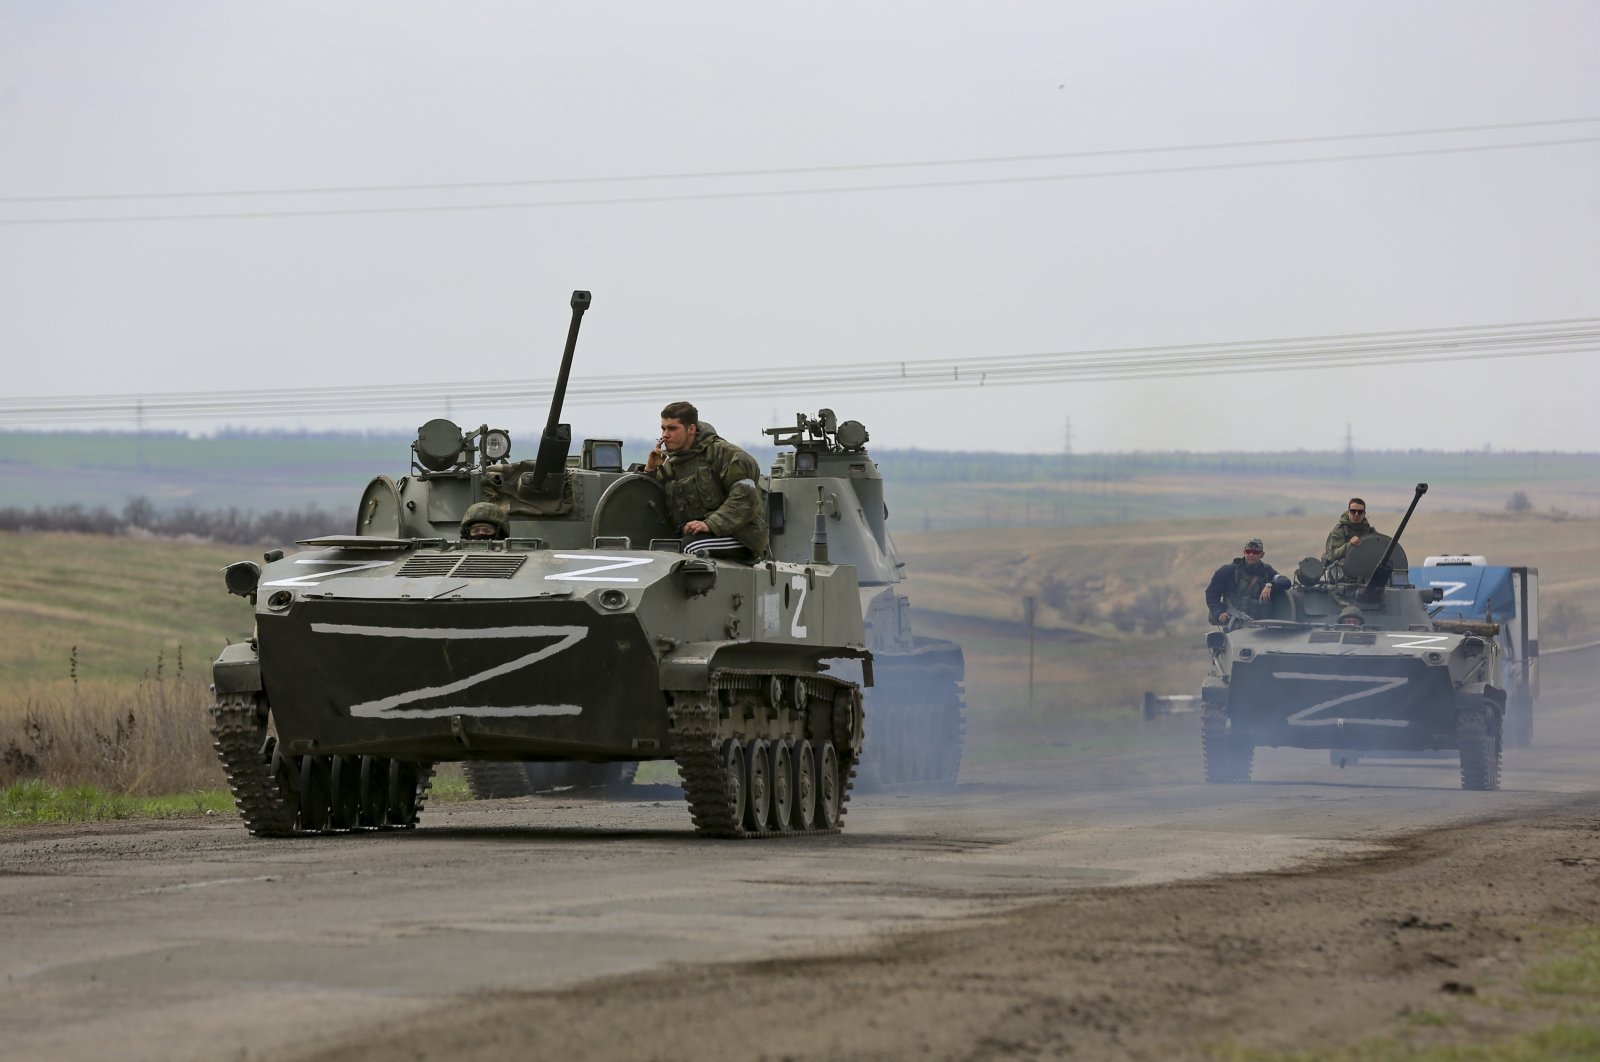 Russian military vehicles move on a highway in an area controlled by Russian-backed separatist forces near Mariupol, Ukraine, April 18, 2022. (AP Photo)